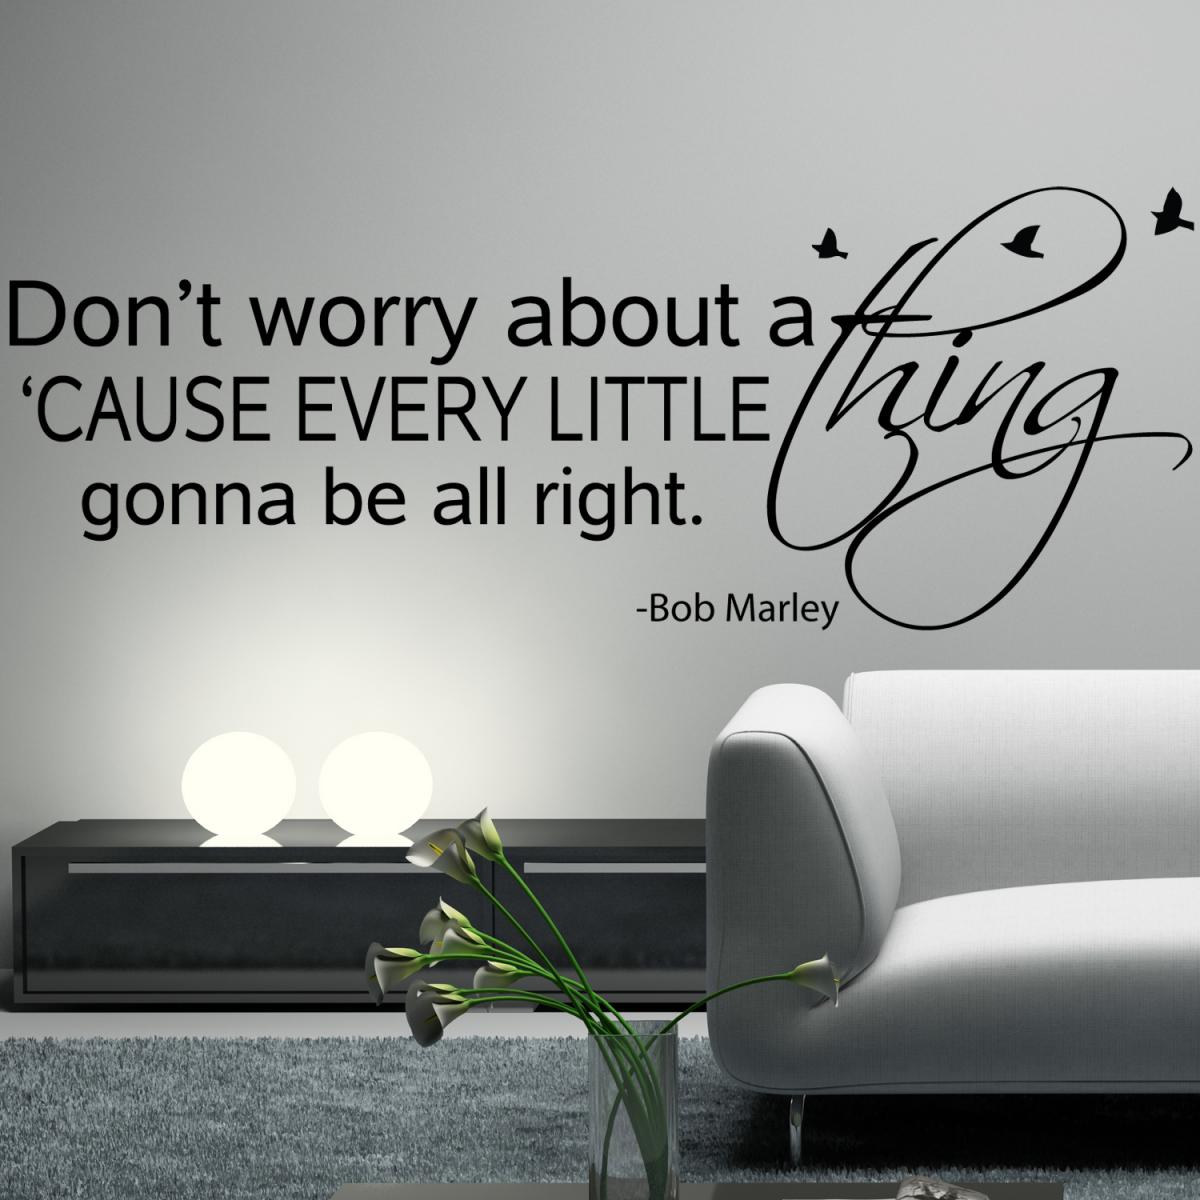 Bob Marley Wall Decal Sticker Art Vinyl Quote Don T Worry About A Thing Every Little Thing Is Gonna On Luulla